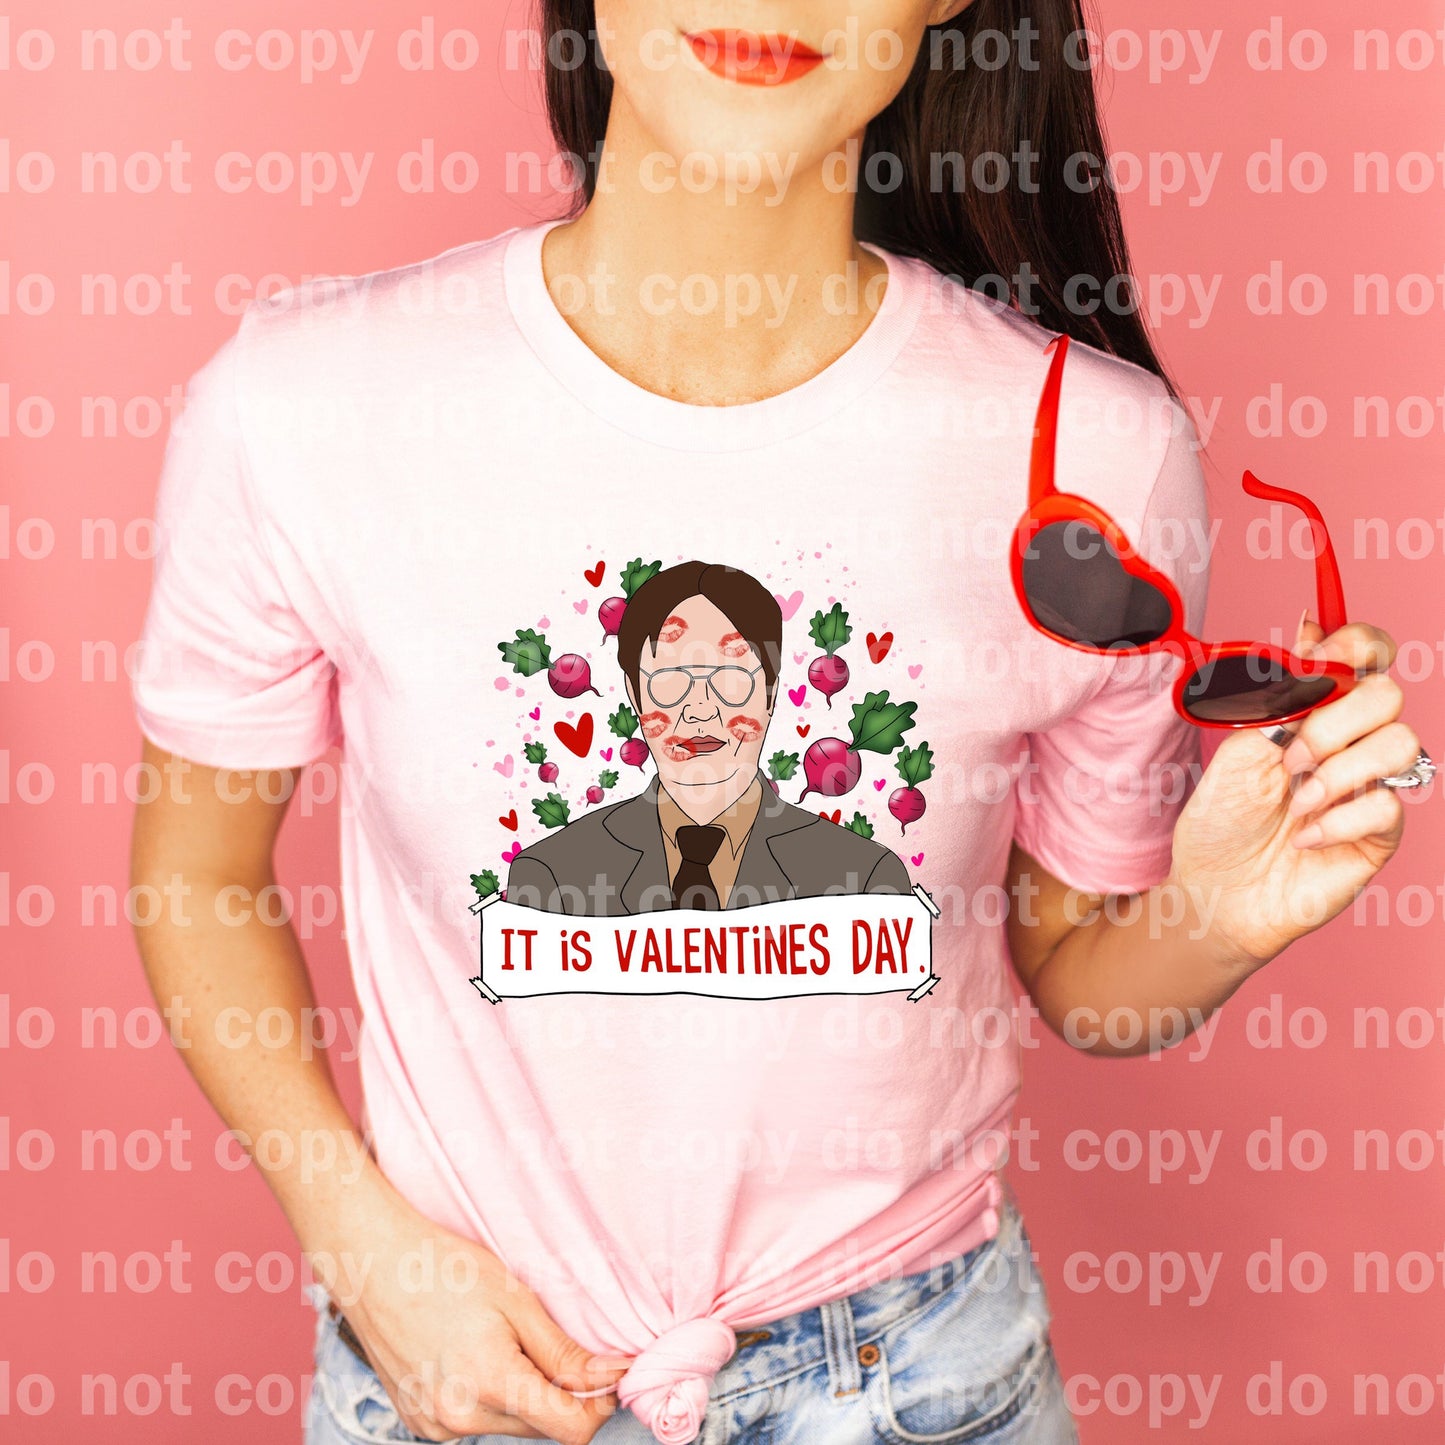 It Is Valentines Day with Optional Sleeve Design Dream Print or Sublimation Print